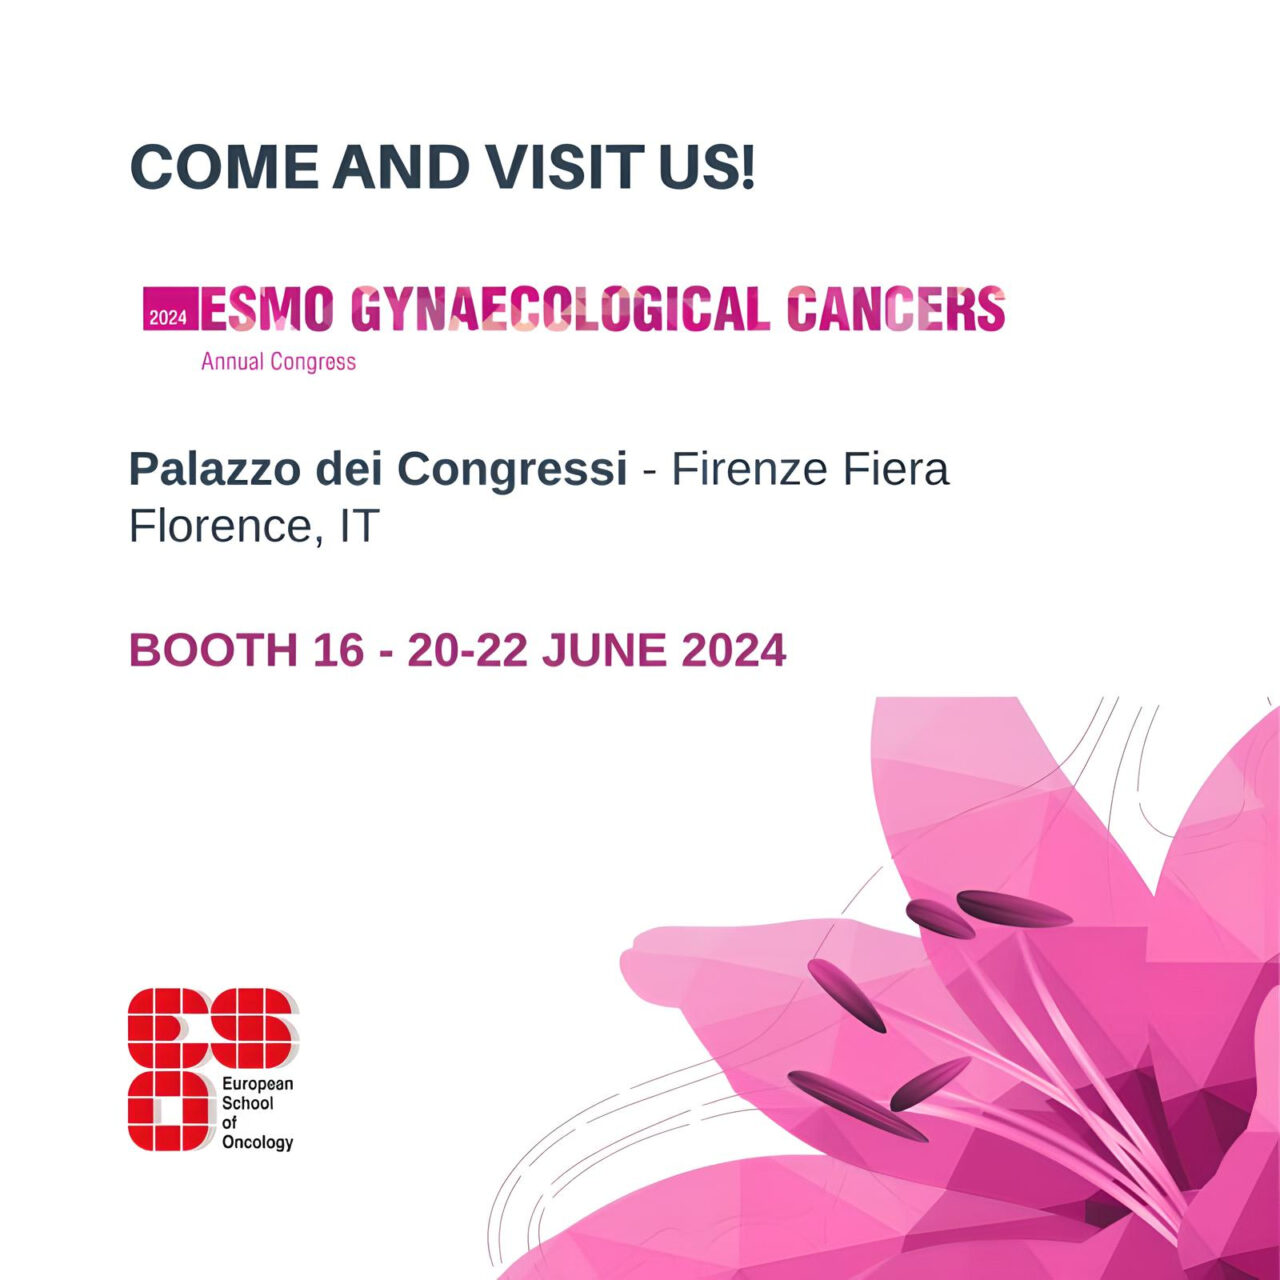 Visit the ESO booth at ESMO Gynaecological Cancers Congress 2024